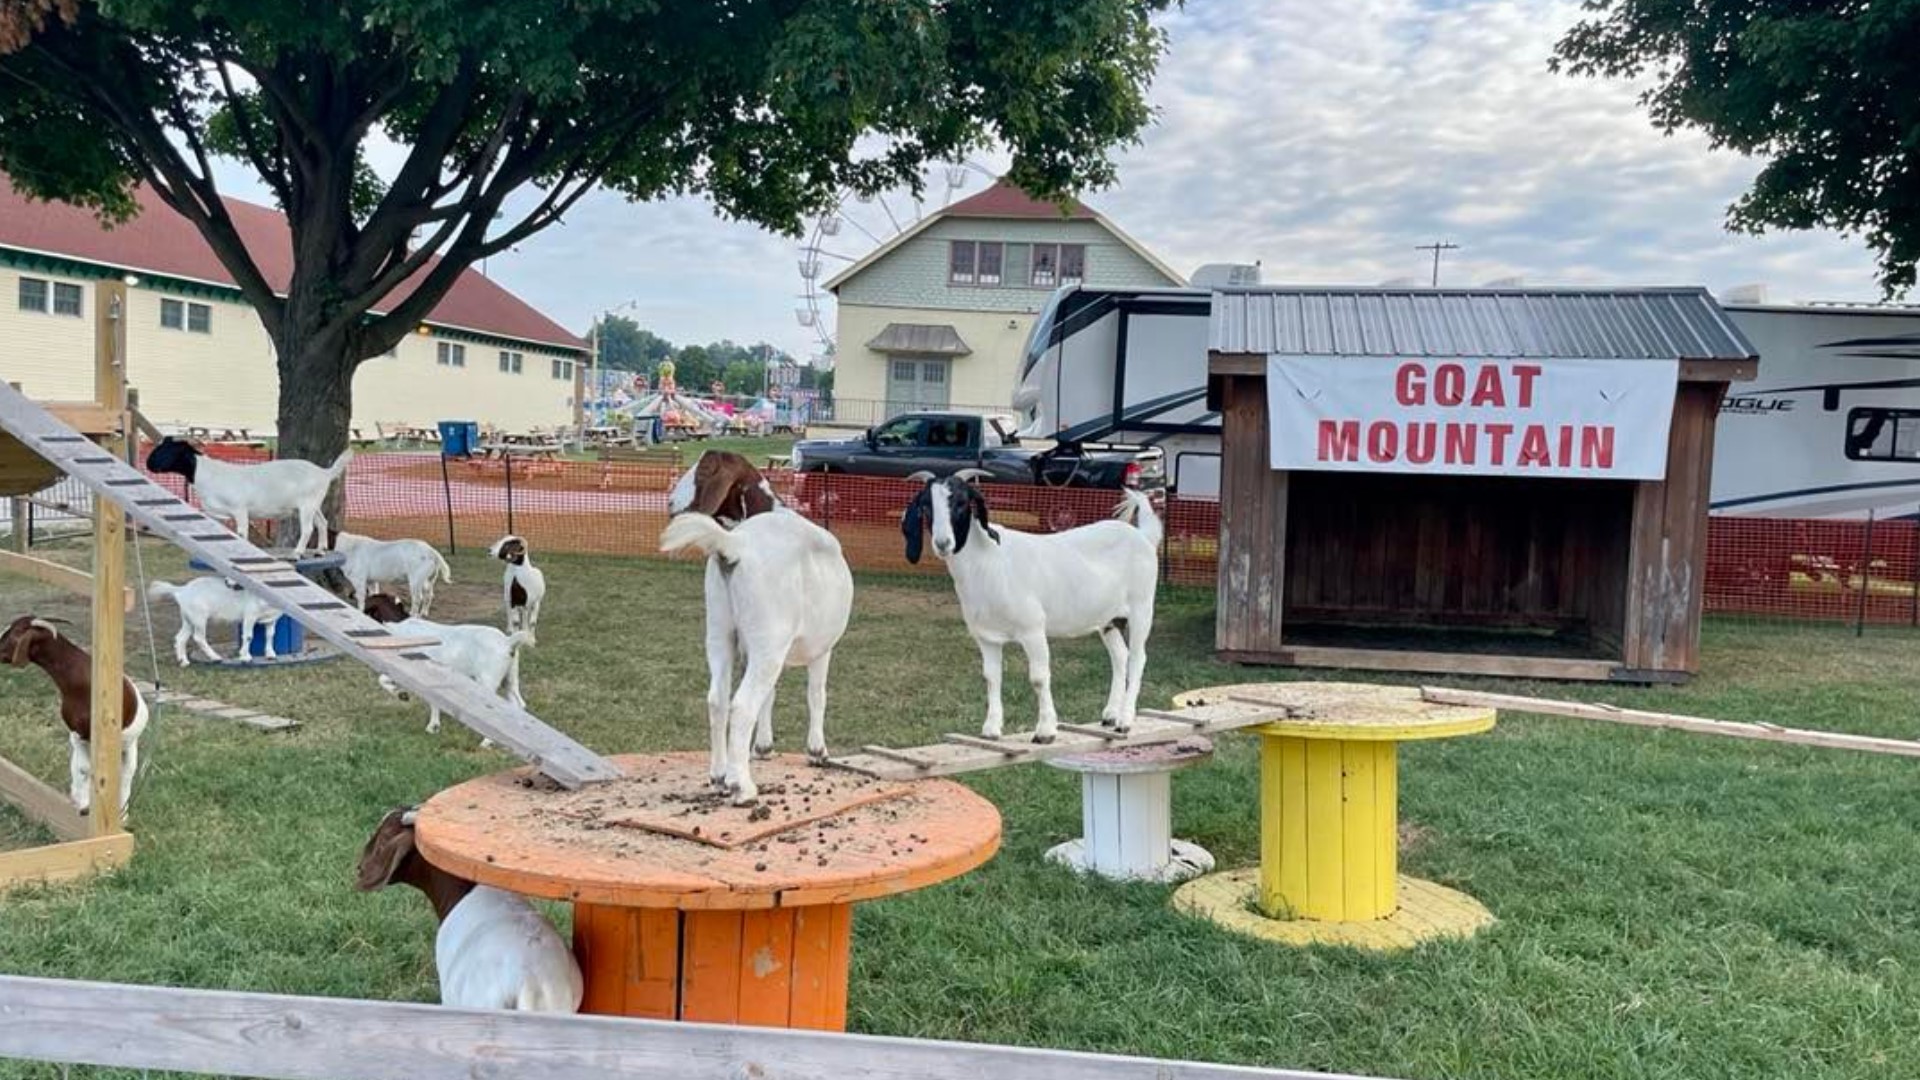 A number of agricultural and animal exhibits are helping keep the fair's roots in focus this year.